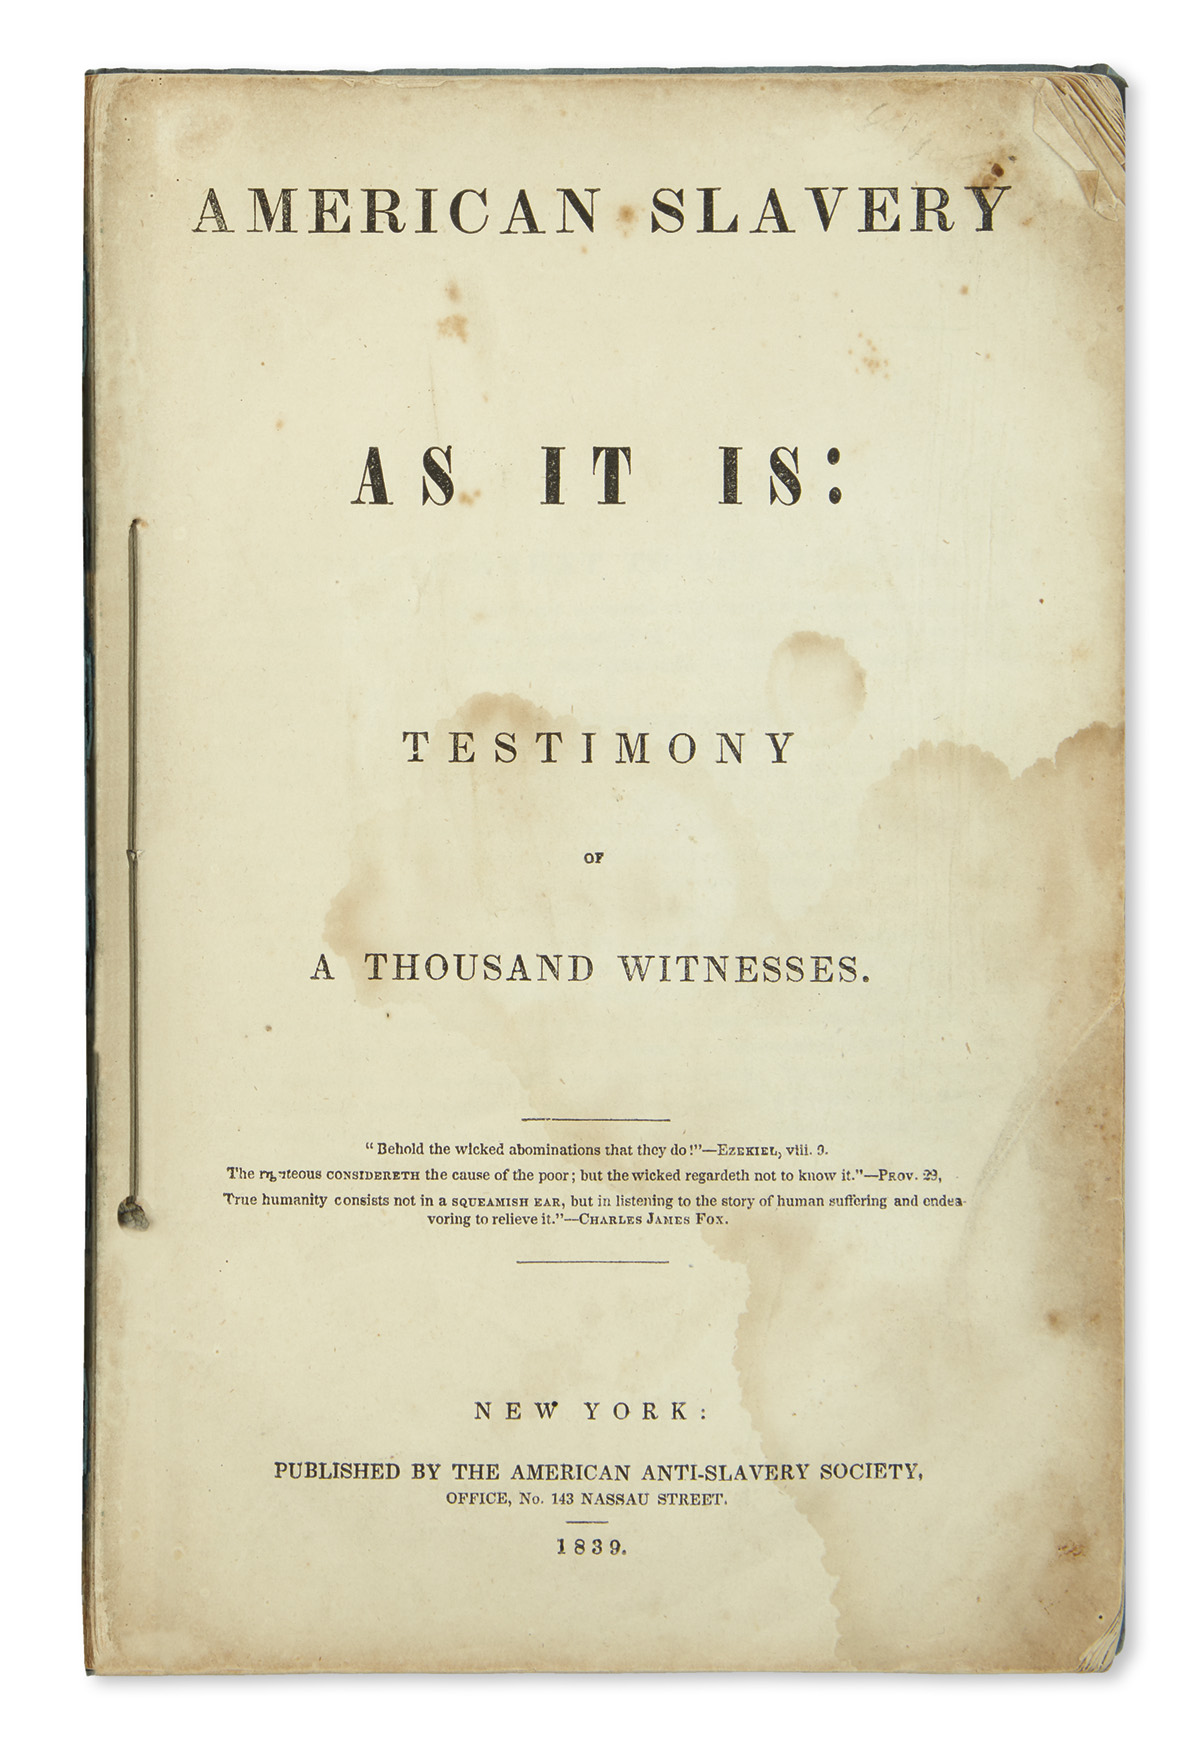 (SLAVERY AND ABOLITION.) [Weld, Theodore D.; editor.] American Slavery As It Is: Testimony of a Thousand Witnesses.